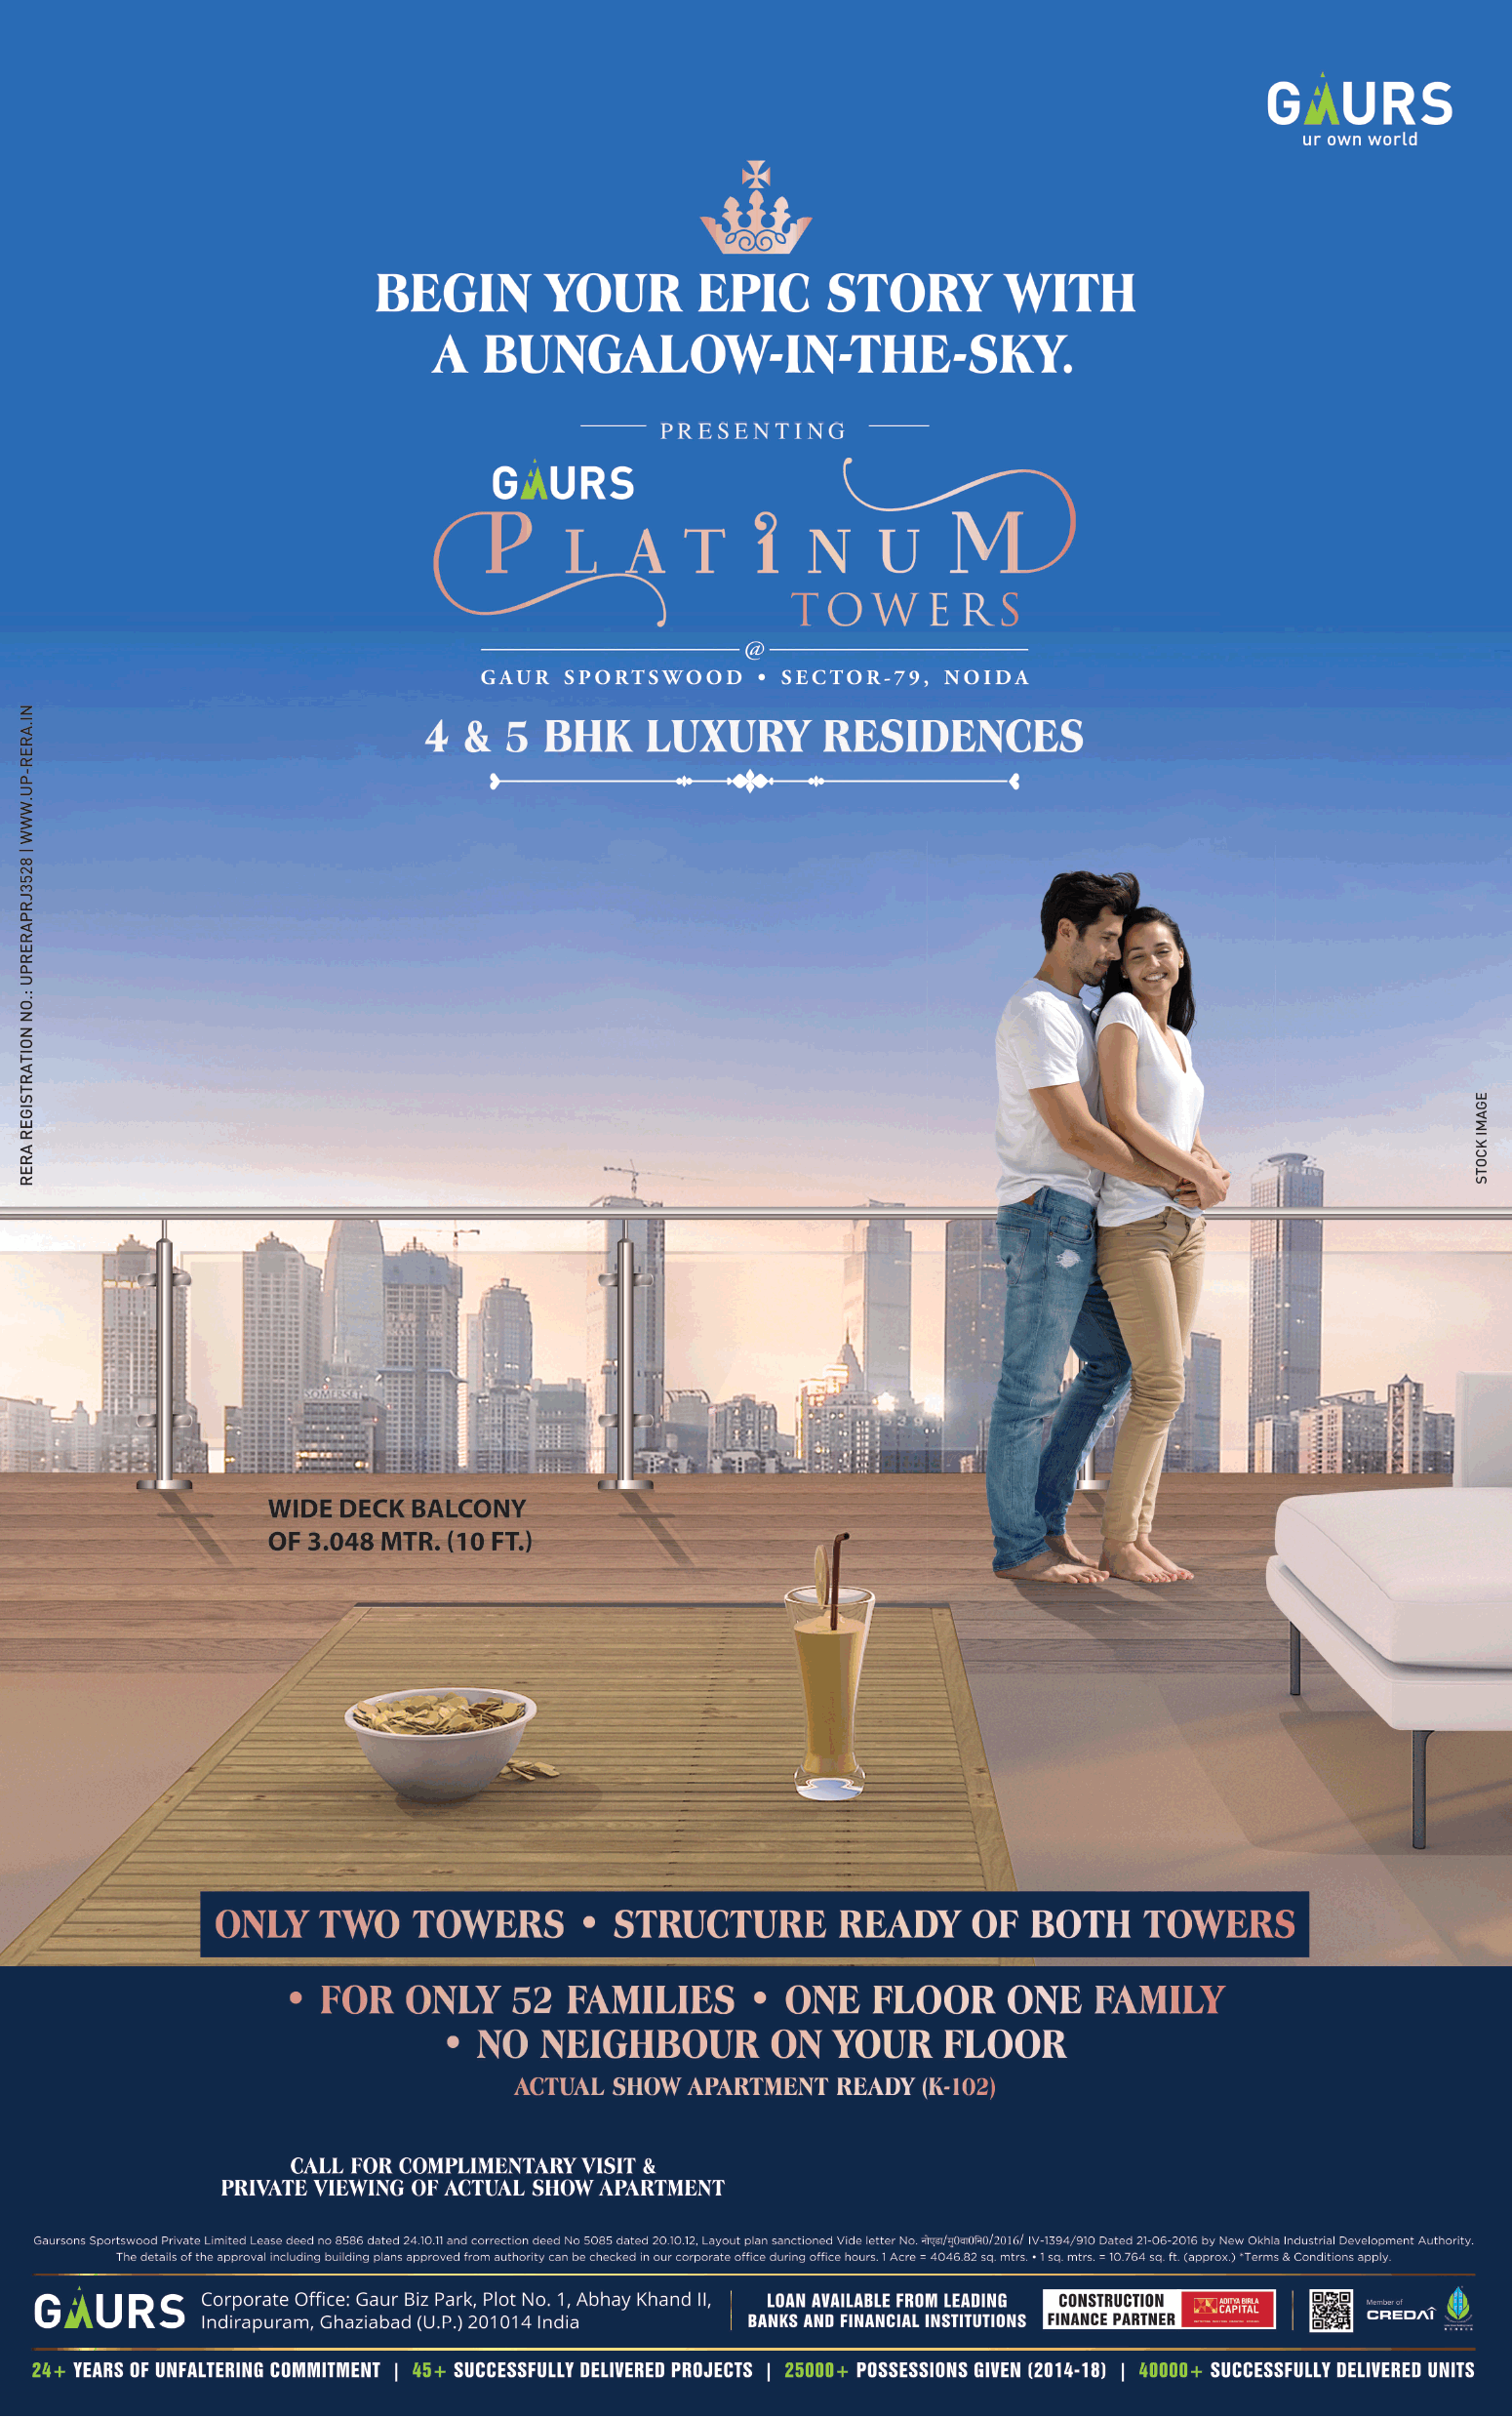 Begin your epic story with a bungalow-in-the-sky at Gaurs Platinum Towers in Sector 79, Noida